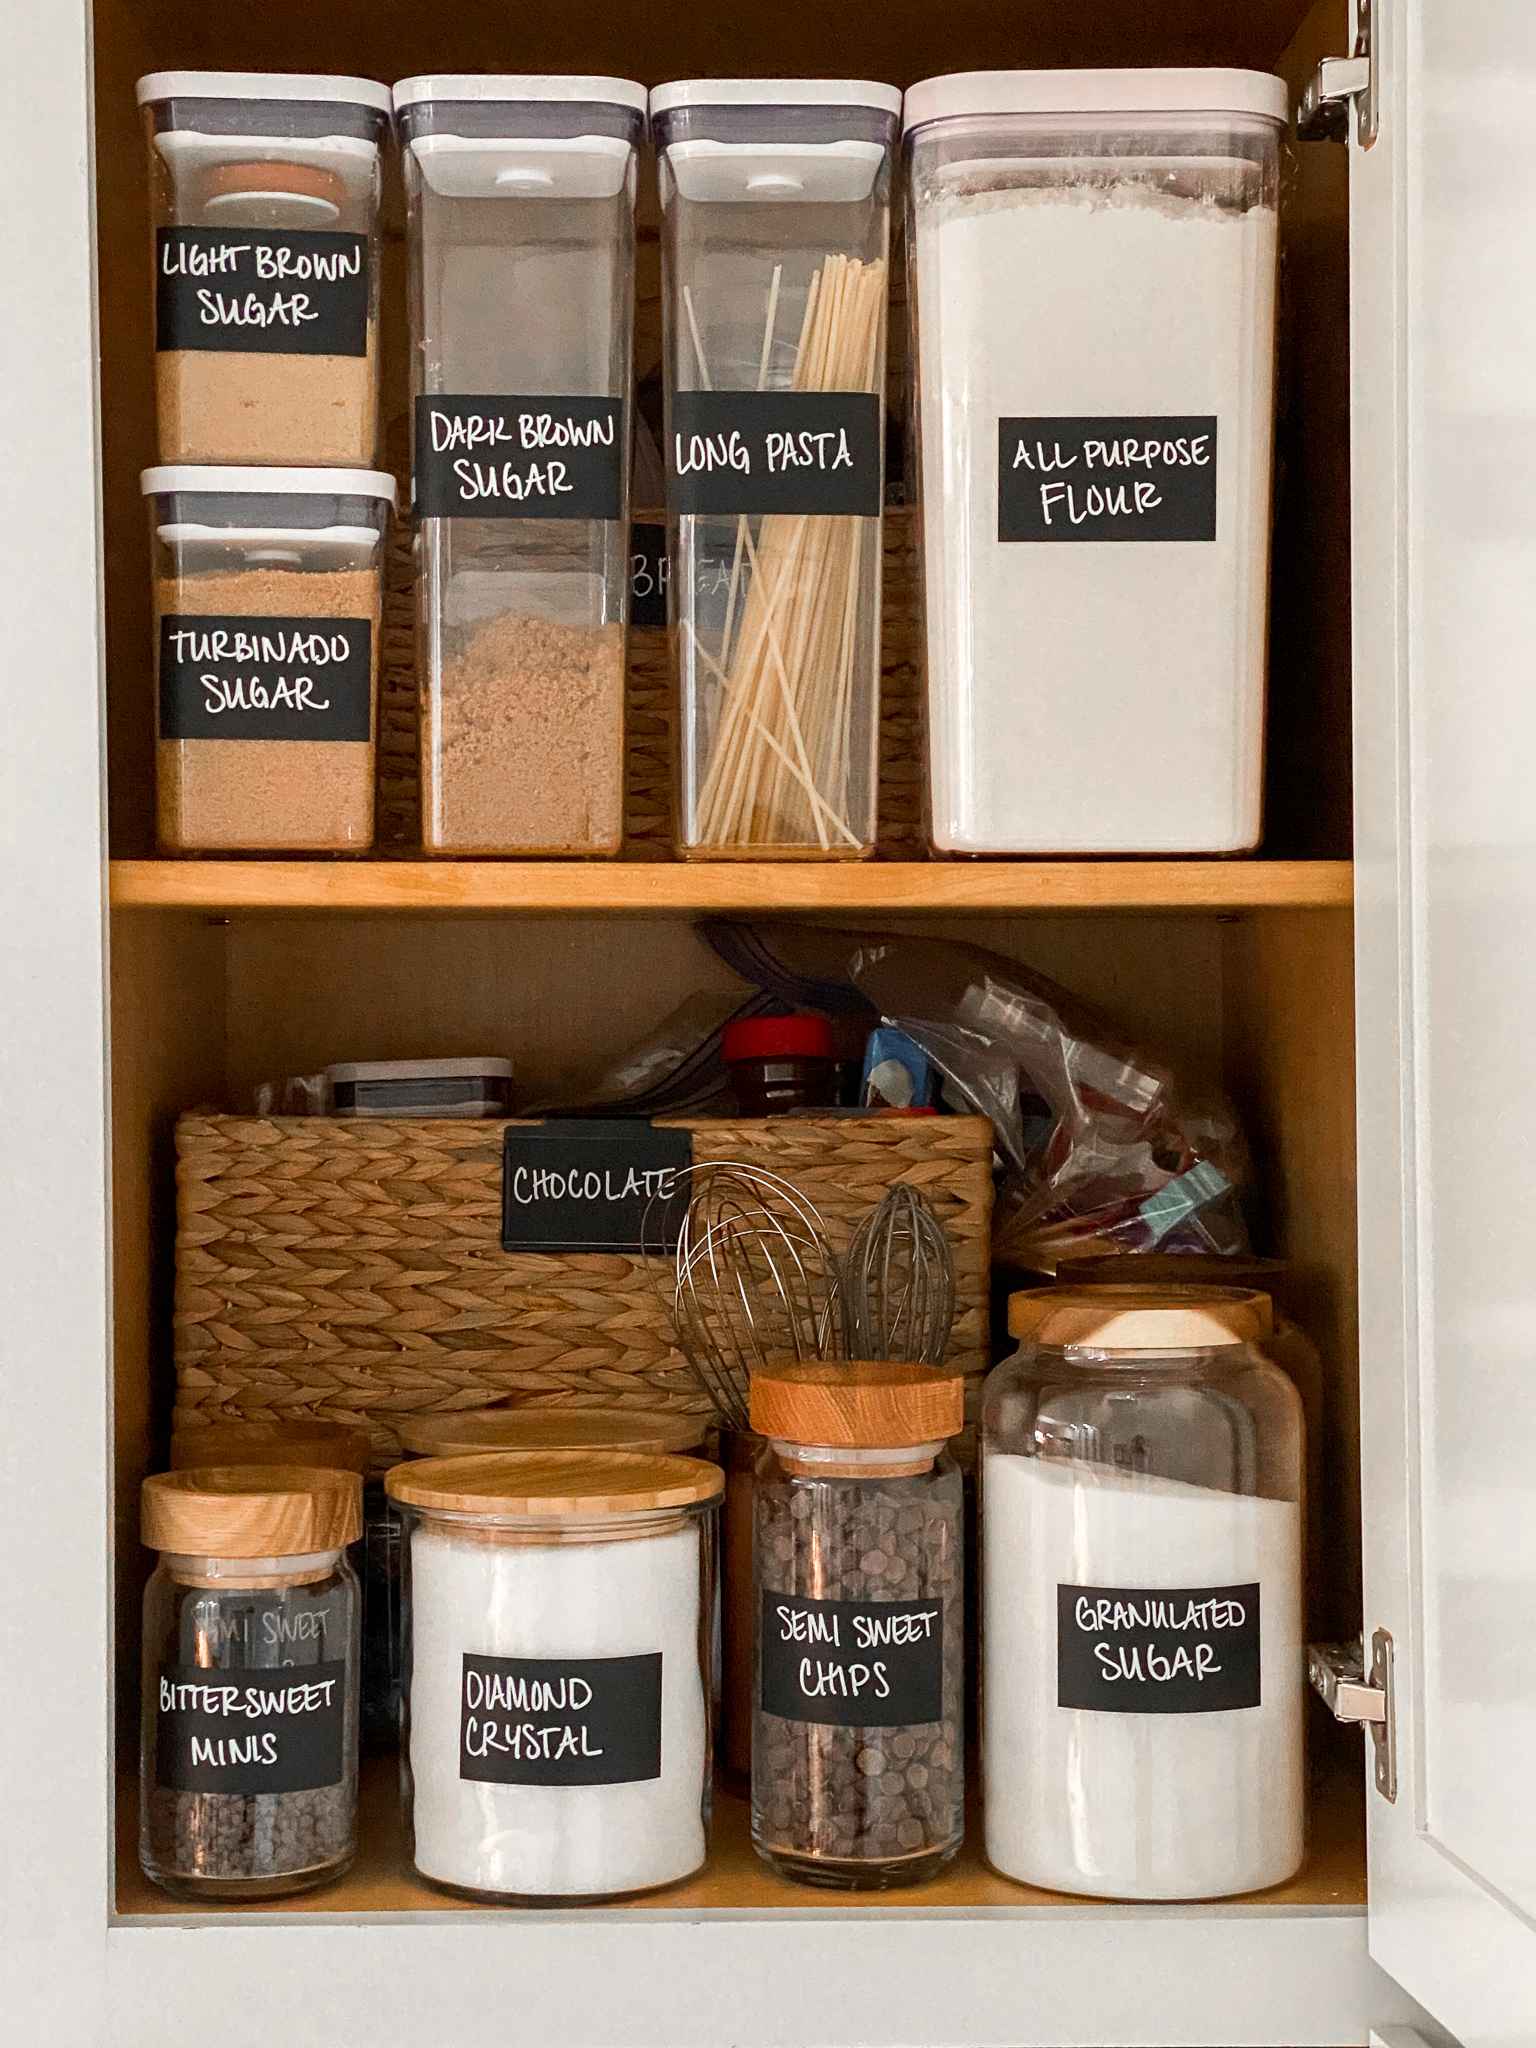 How To Really Organize Deep Pantry Shelves When You Have No Time - Be So You